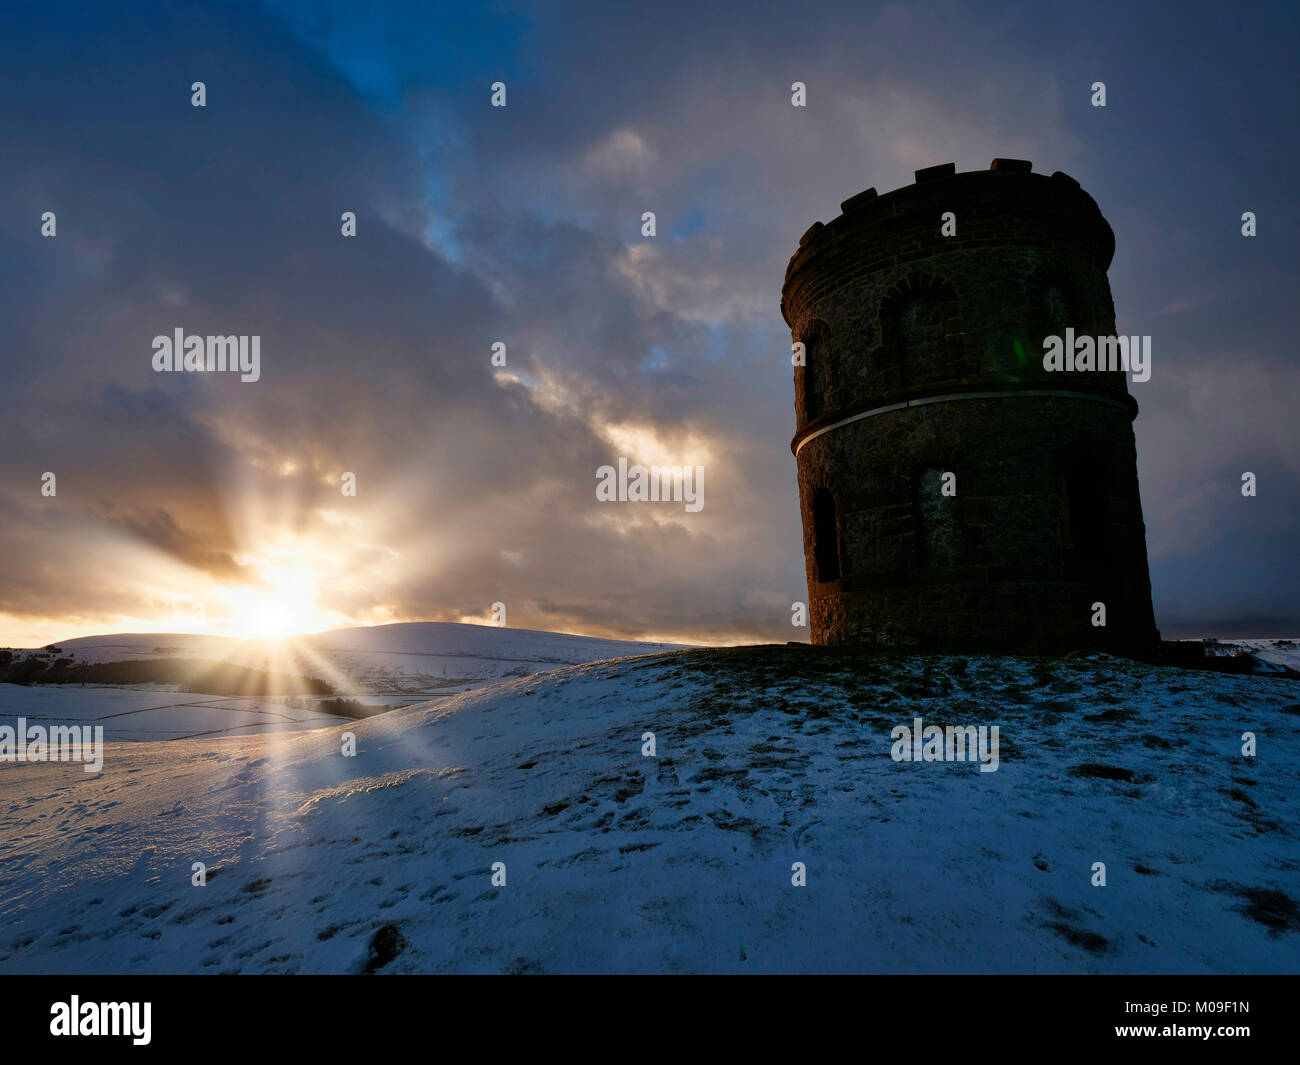 Buxton, Derbyshire, UK. 19th January, 2018. UK Weather: Sunset over Solomon's Temple Buxton Derbyshire, also called Grinlow Tower the Victorian Fortified hill marker above the spa town of Buxton in the Derbyshire Peak District National Park Credit: Doug Blane/Alamy Live News Stock Photo